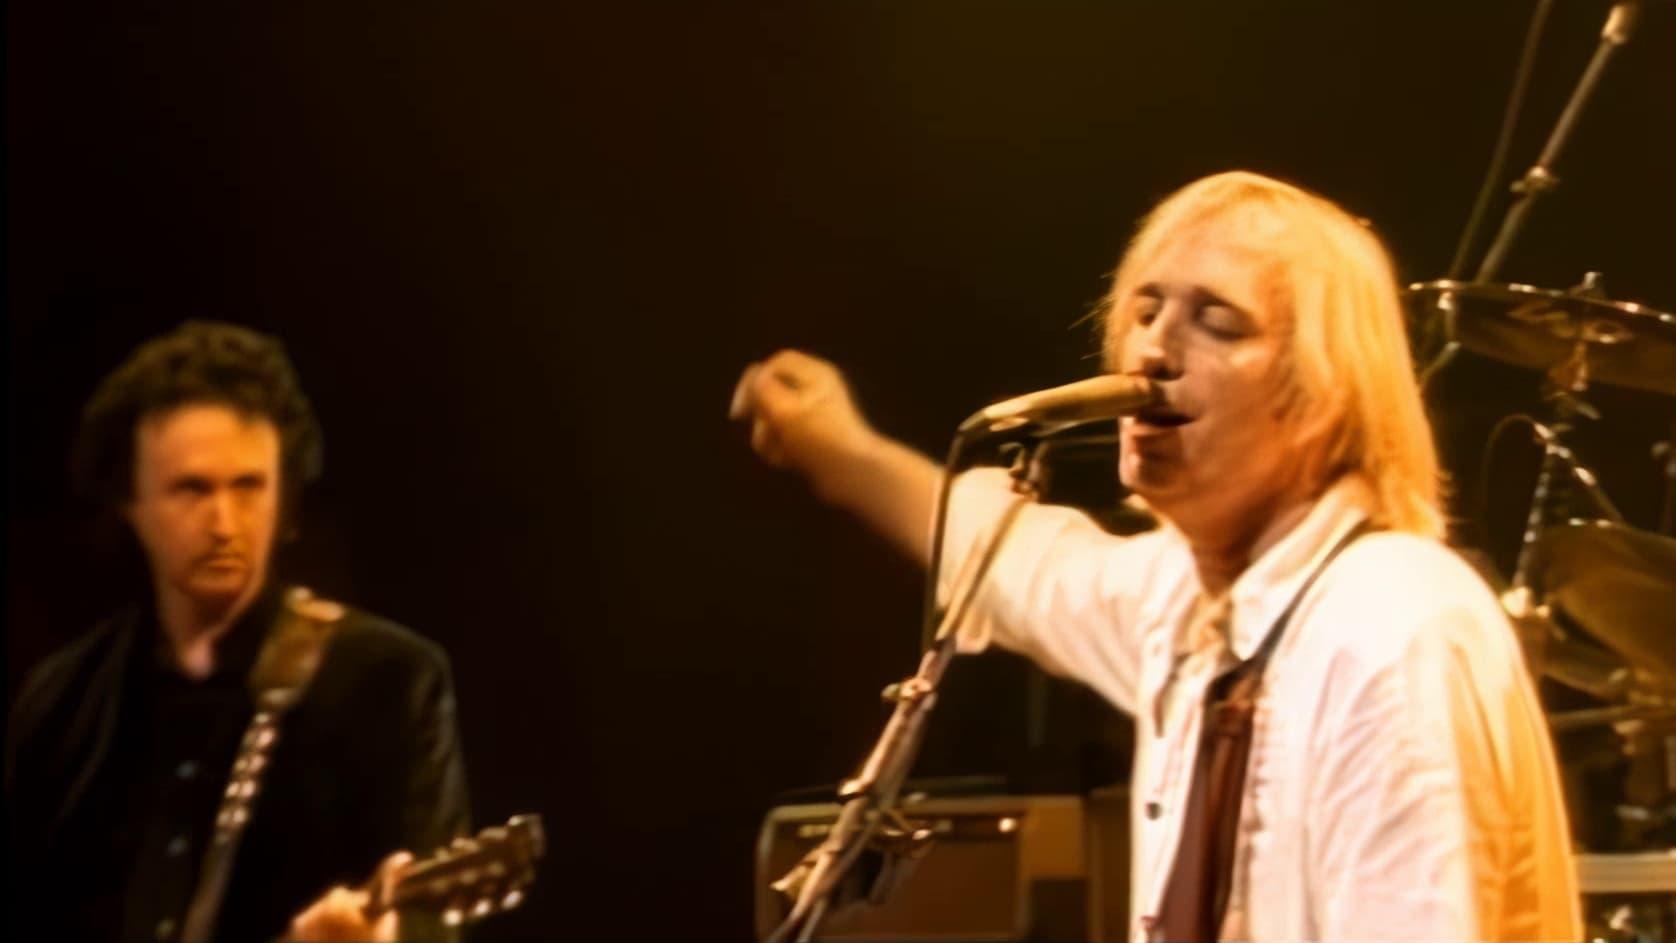 Tom Petty & the Heartbreakers - High Grass Dogs - Live from the Fillmore backdrop